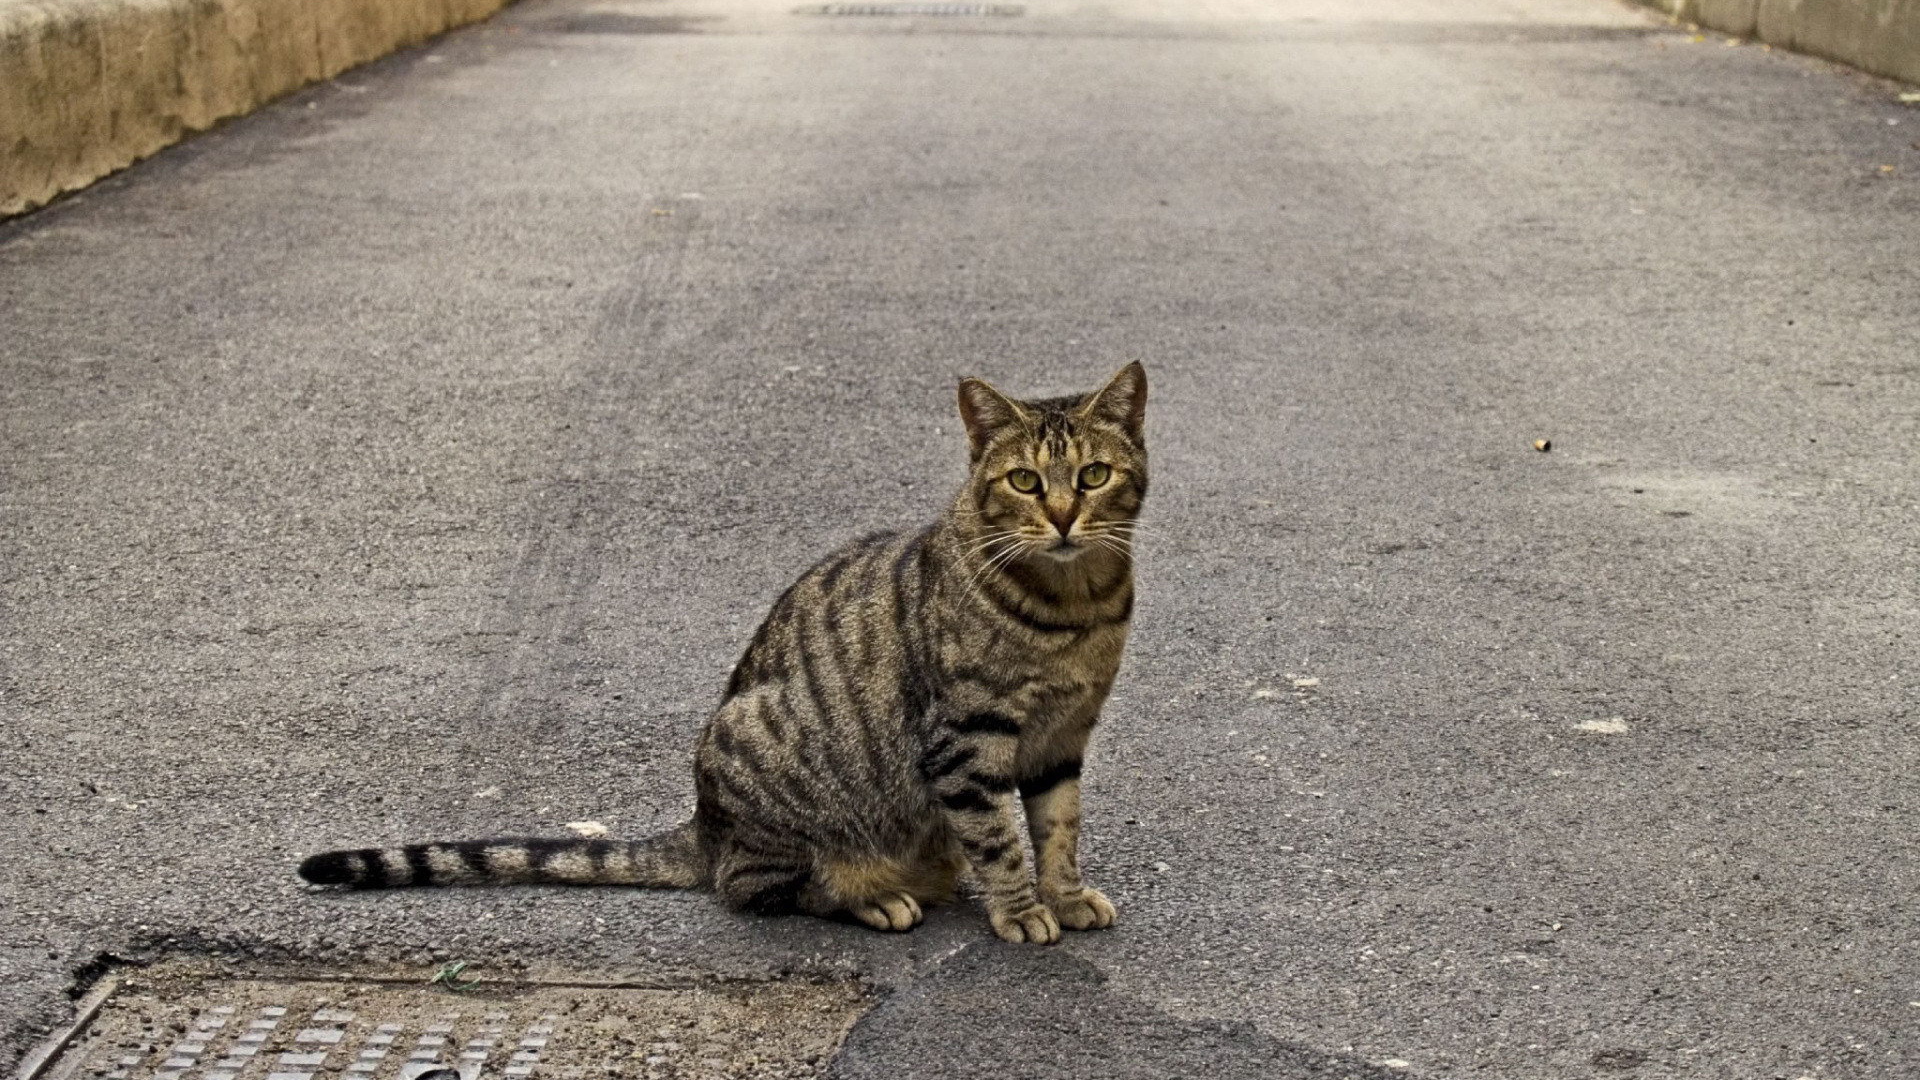 The cat sits on the road